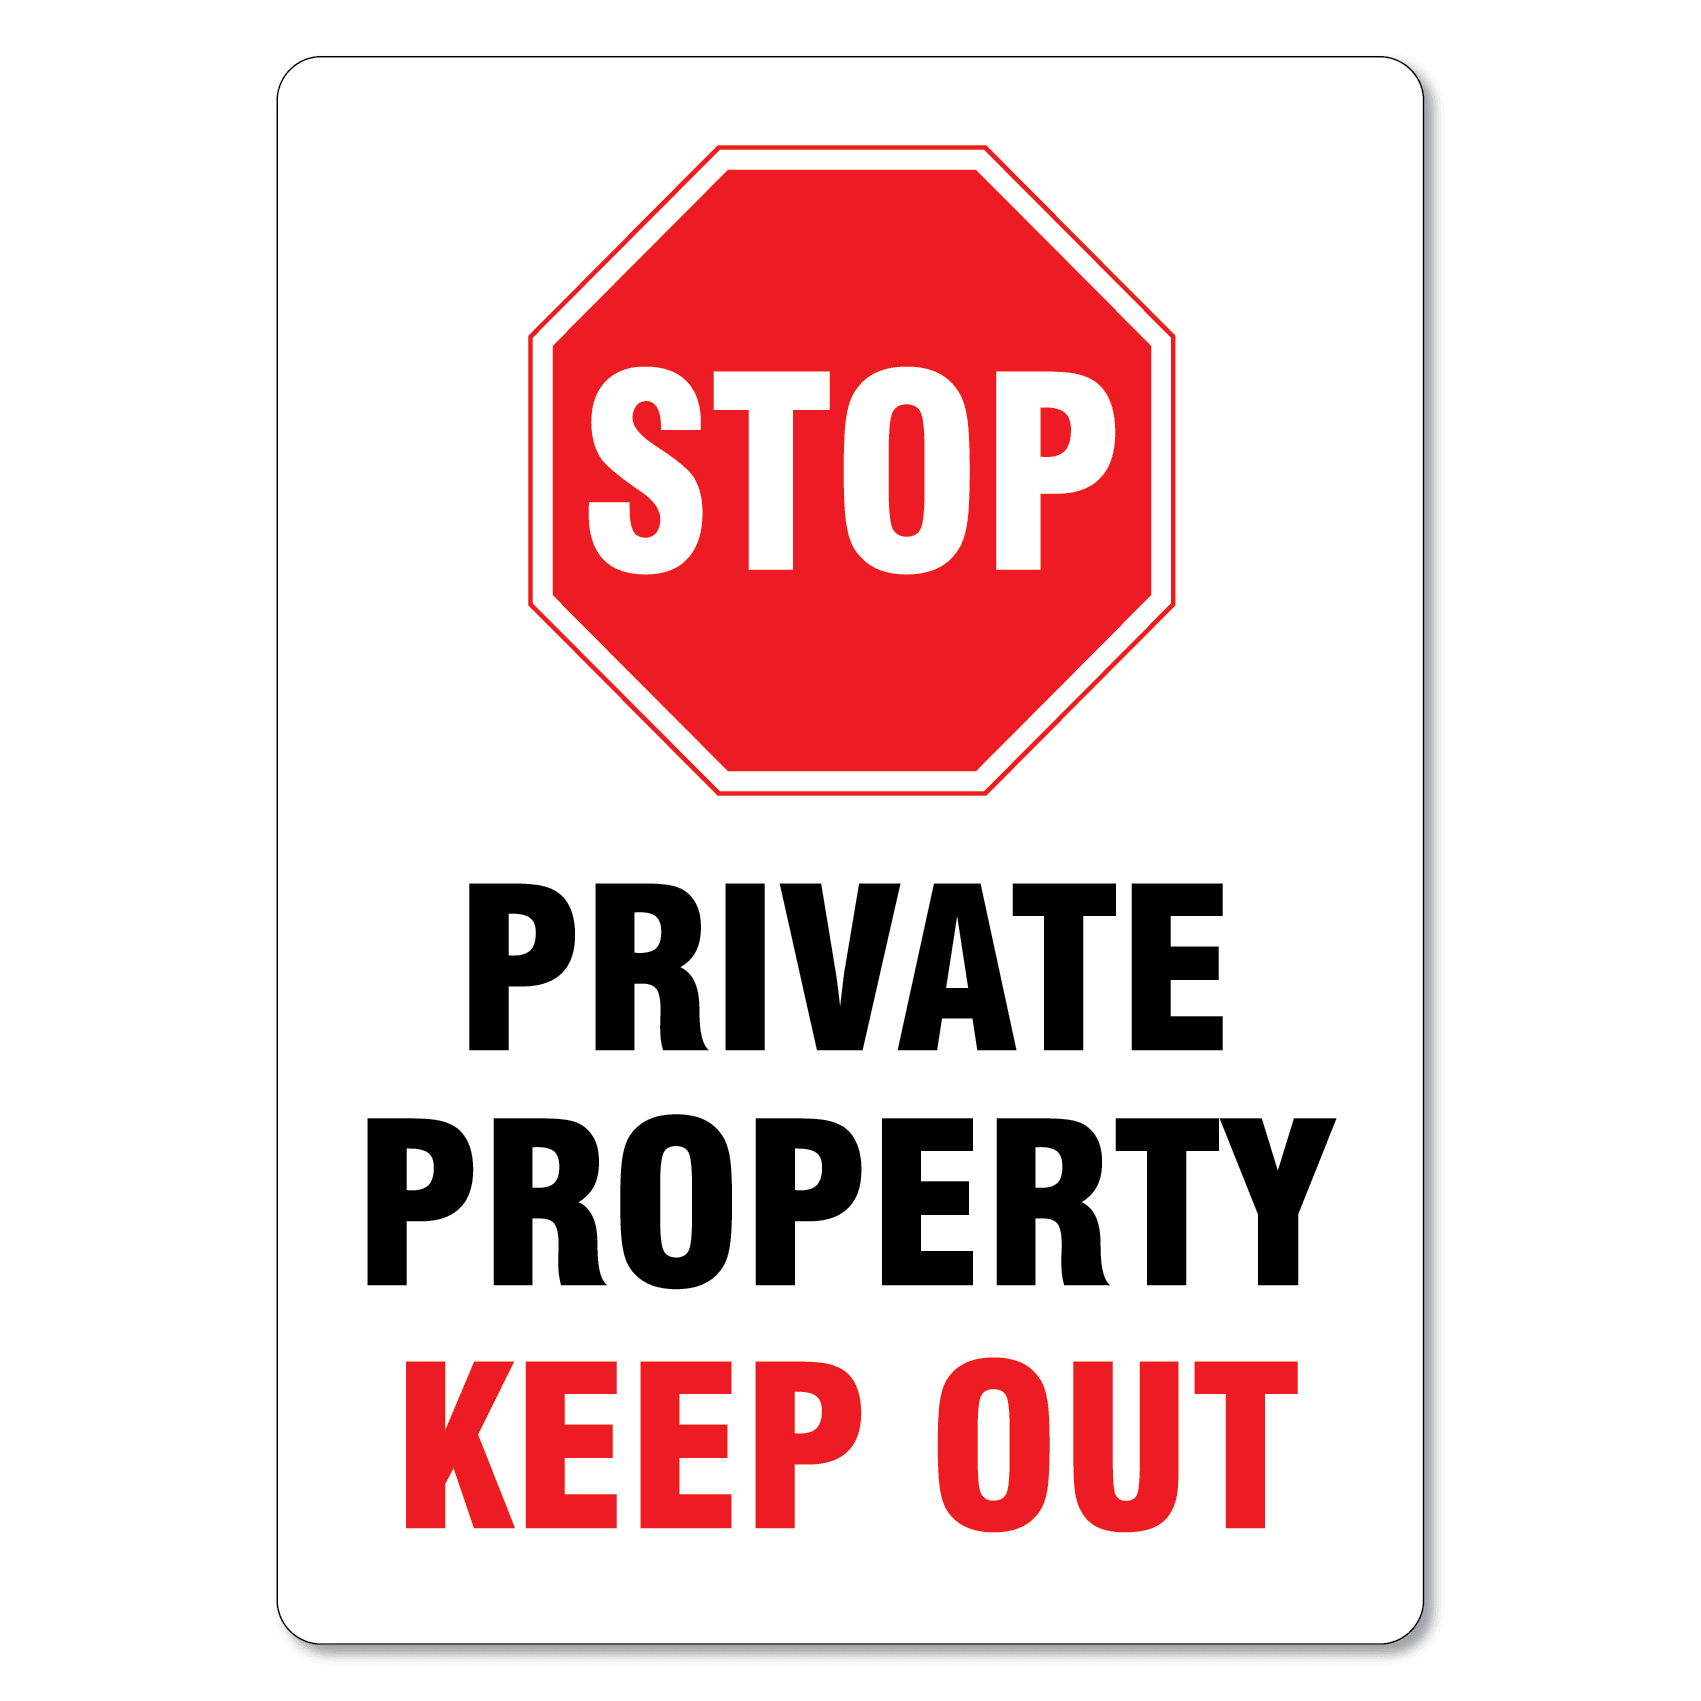 Out private. Private property keep out. Keep out private property sign. No property. Private property.